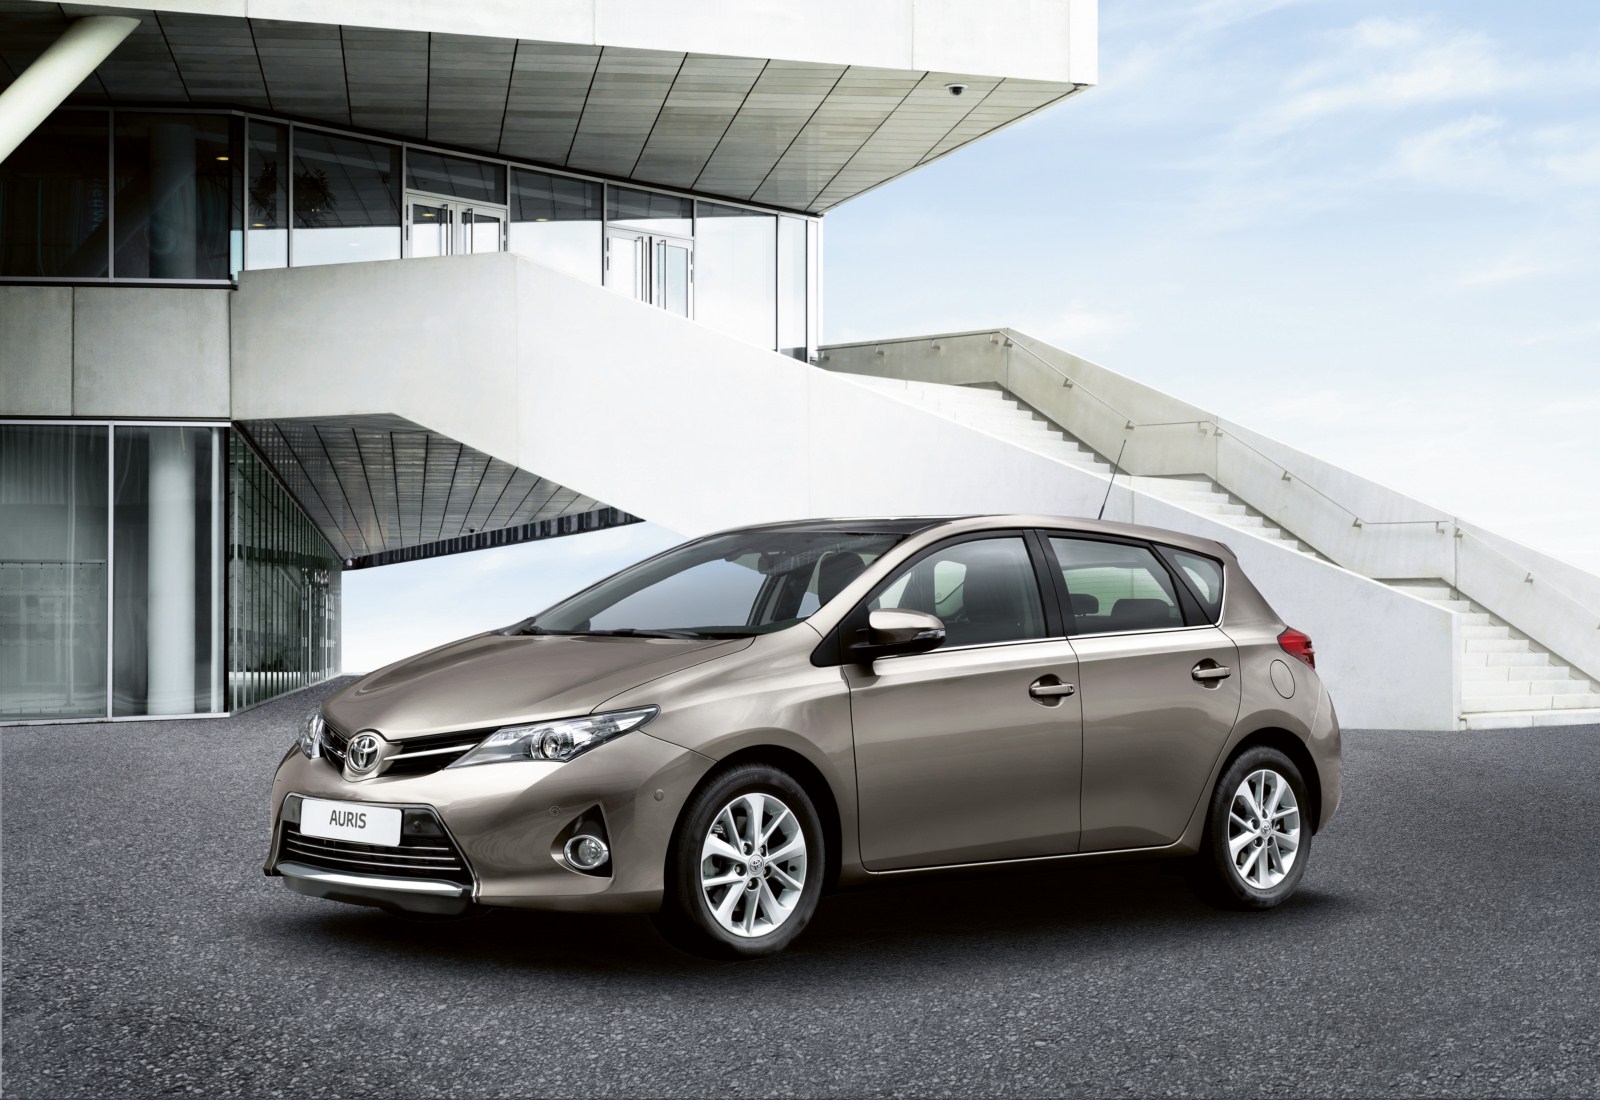 Europeans gets first look at Toyota Auris - Autoblog